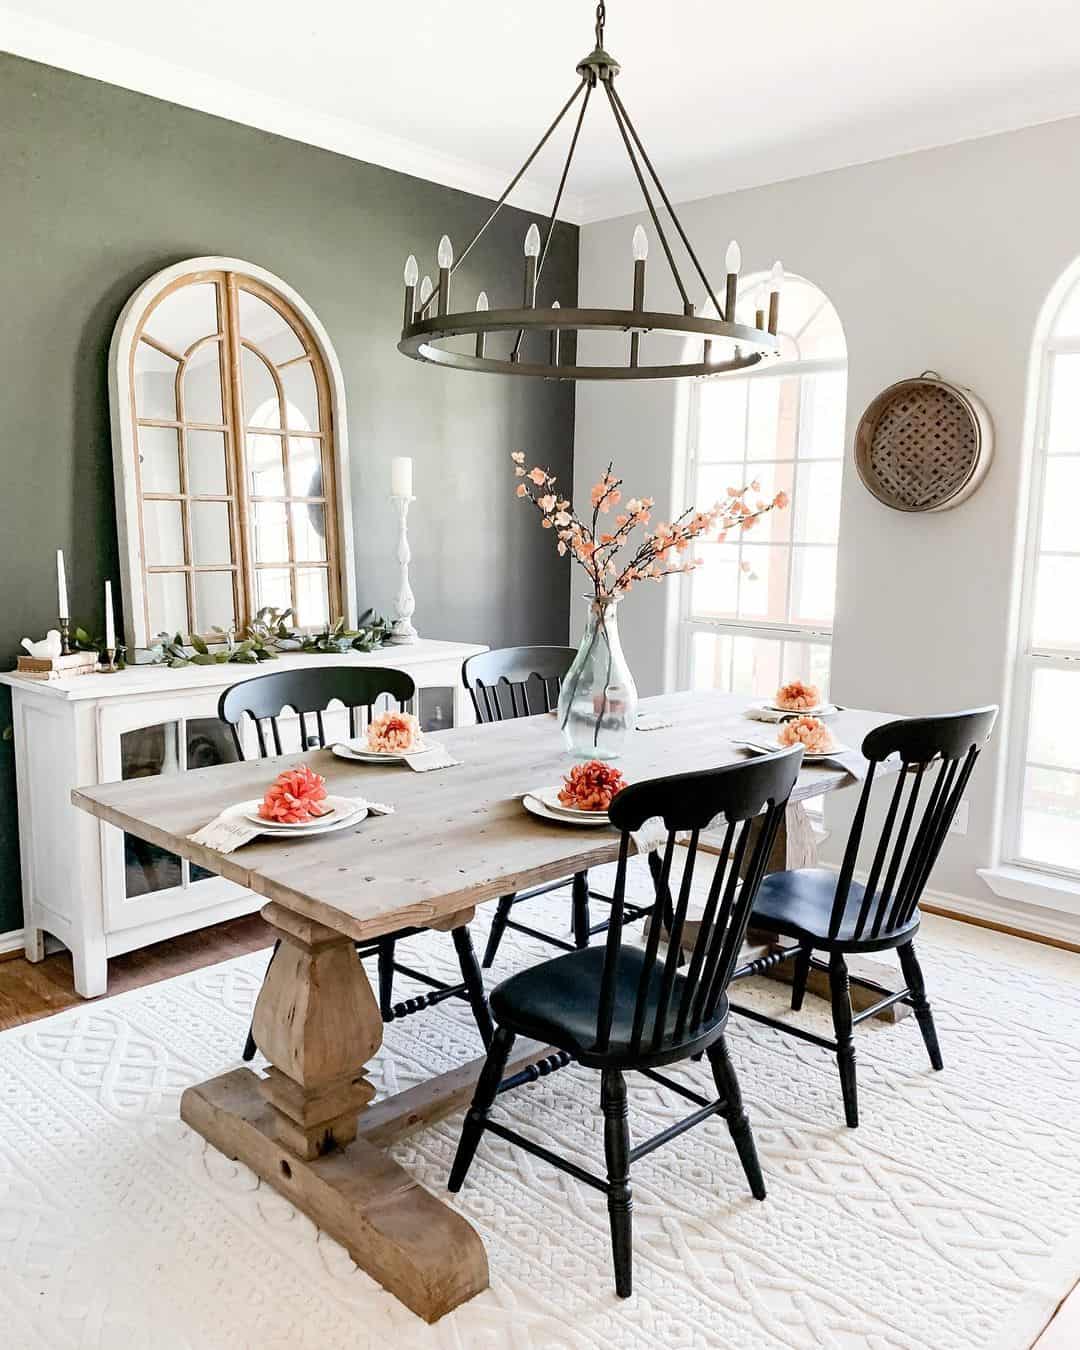 Light Wood Dining Table with Chandelier Lighting - Soul & Lane